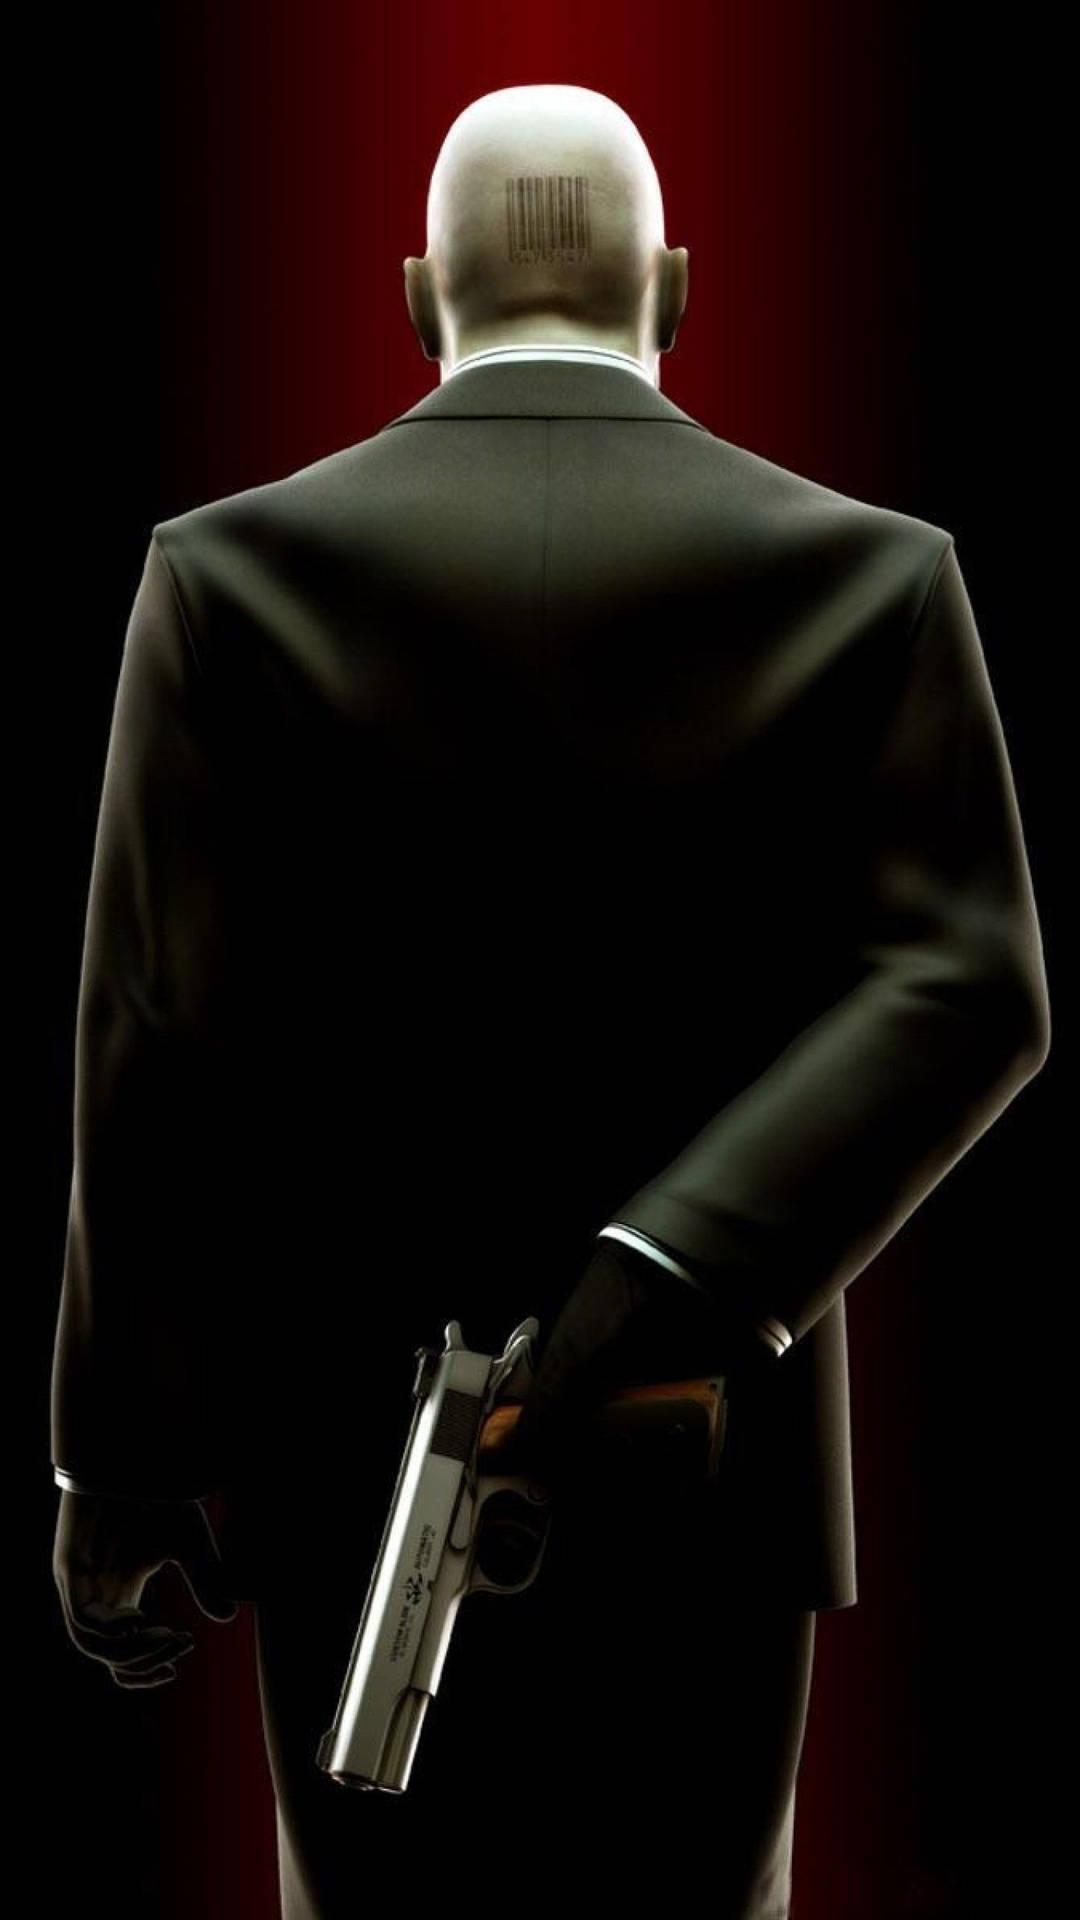 The Hitman Phone - the perfect accessory for any assassin Wallpaper